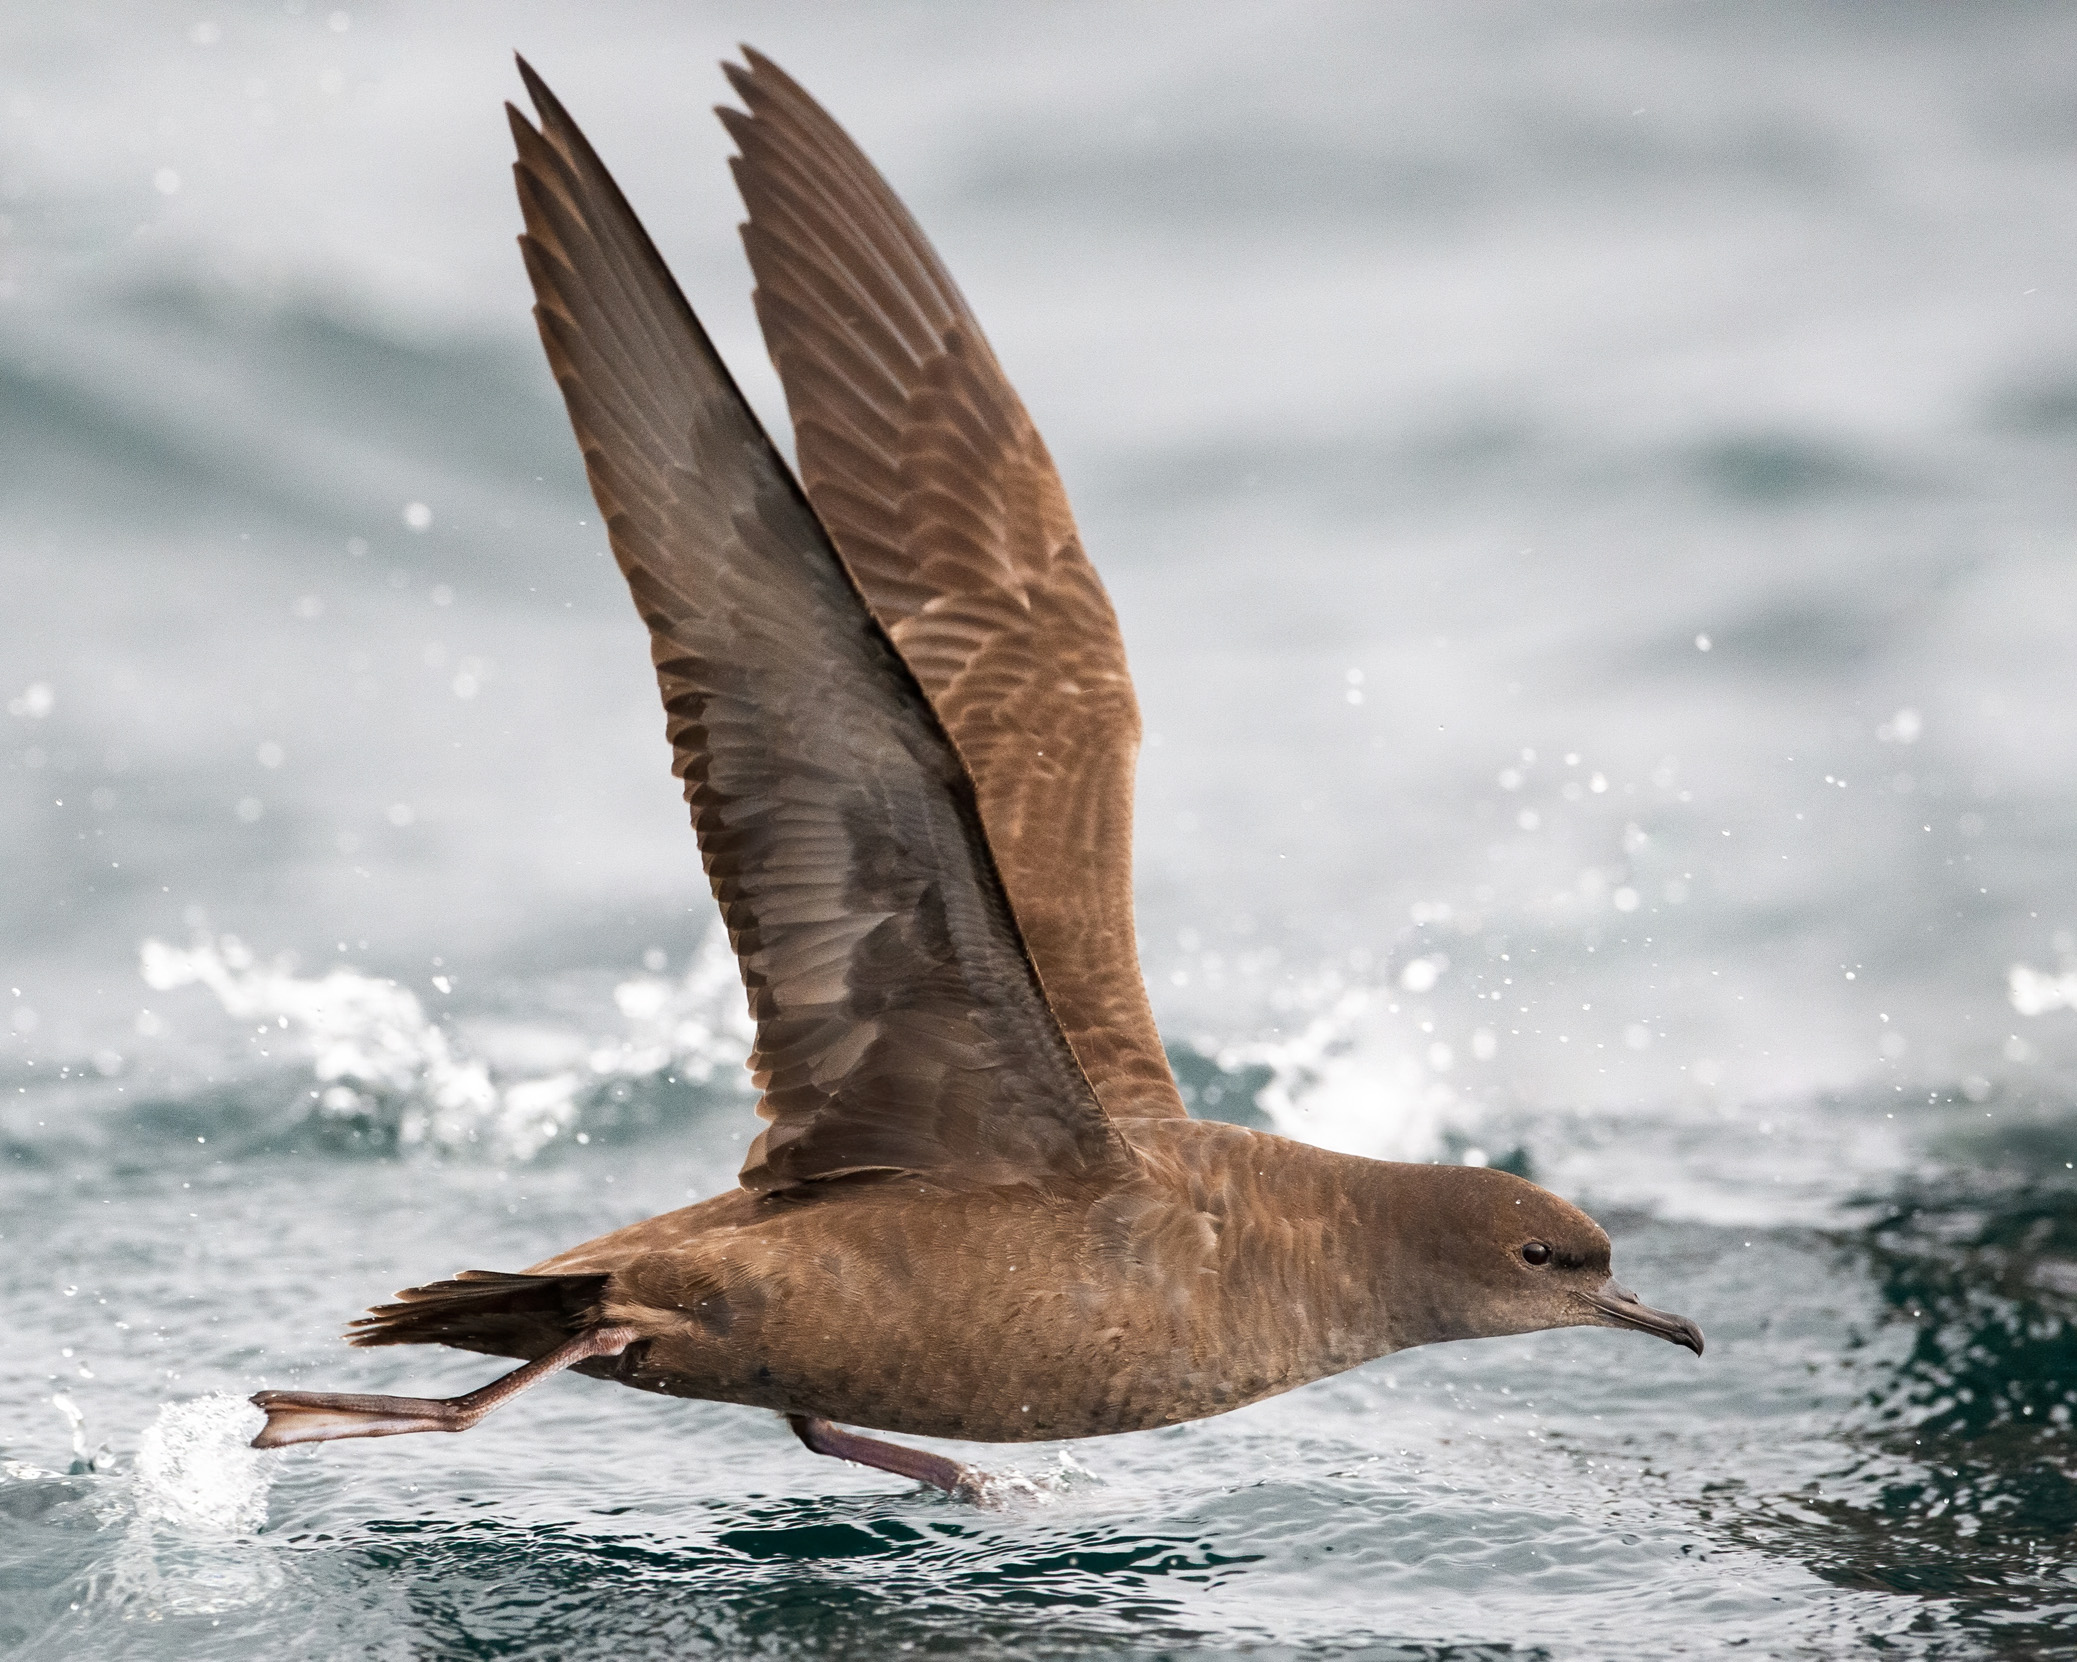 A Sooty Shearwater taking off from a body of water.